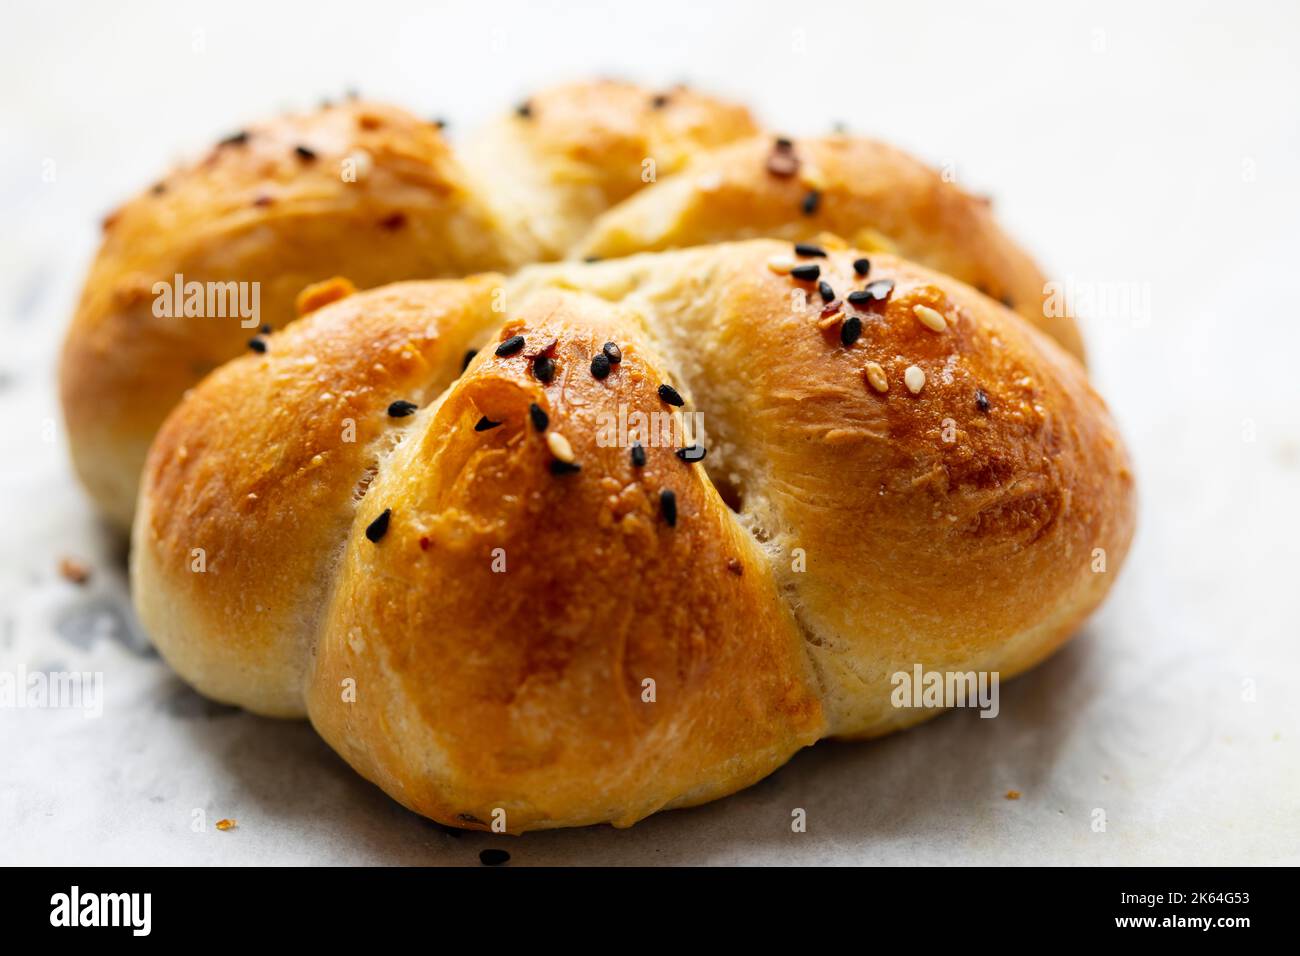 Freshly baked home made bread roll Stock Photo